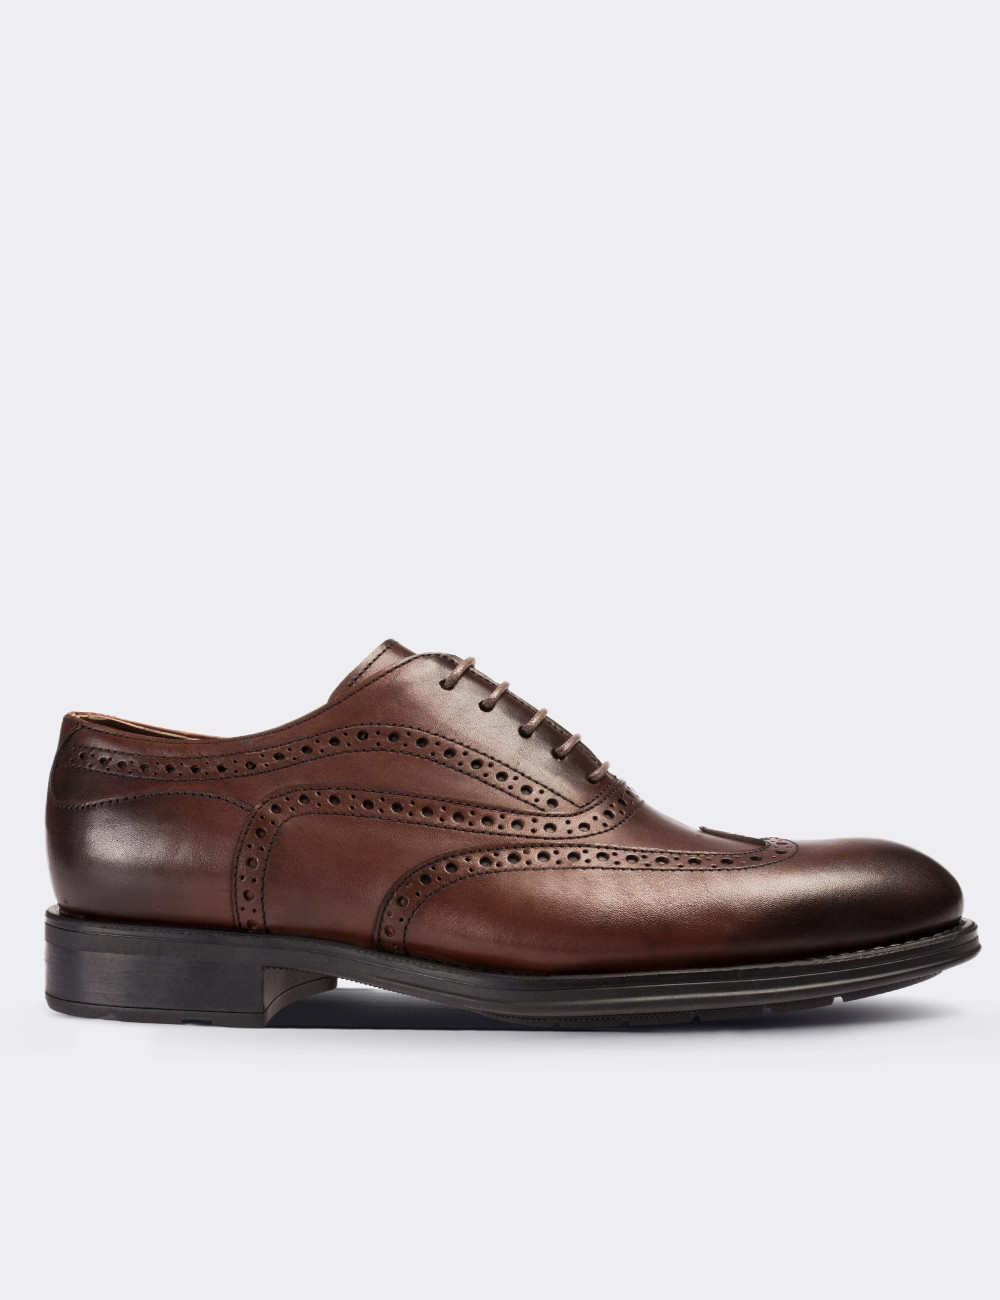 Brown Leather Classic Shoes - Deery